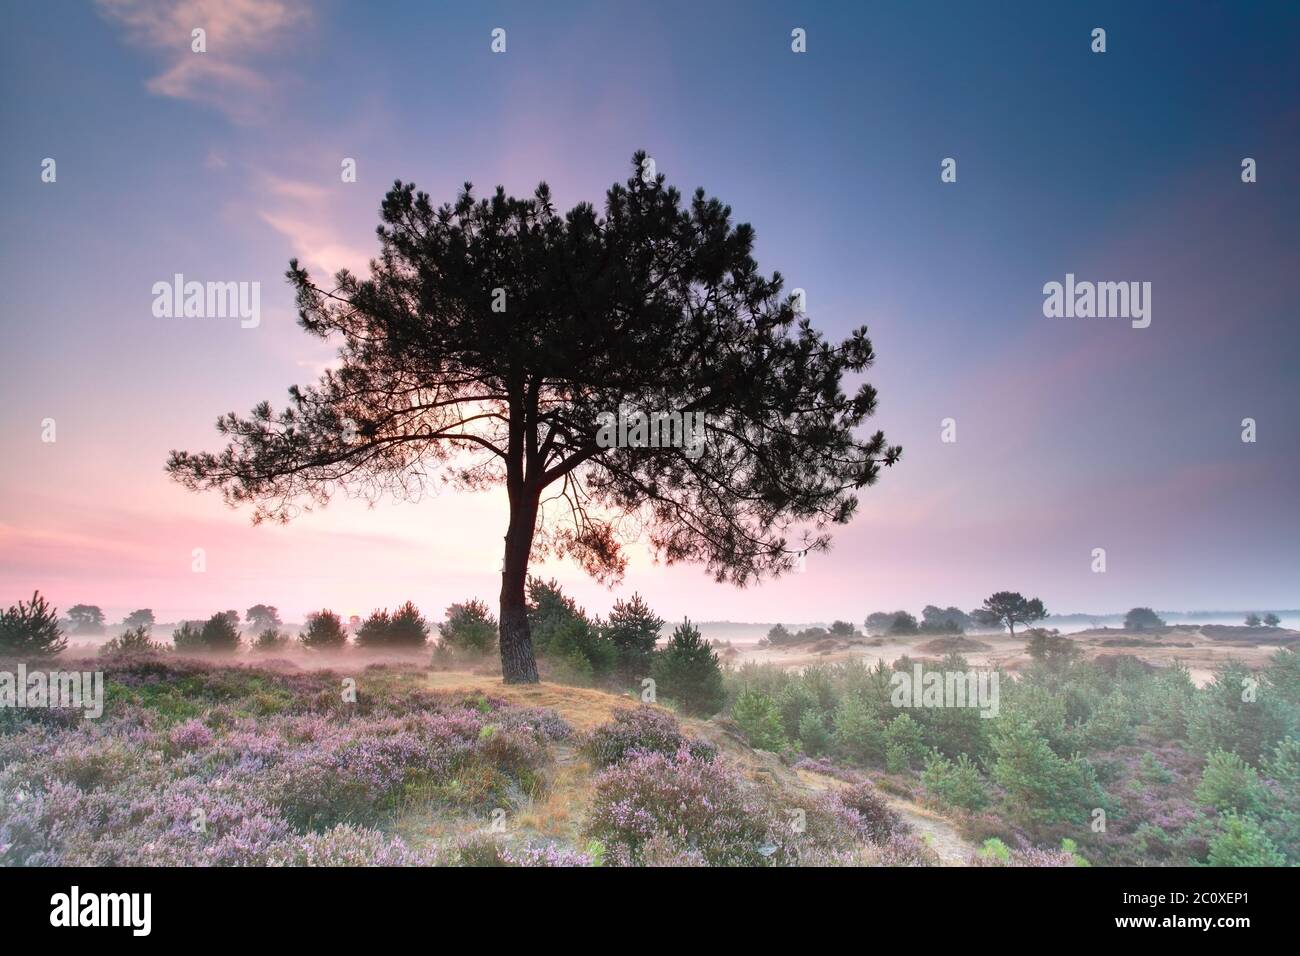 pine tree on hill with flowering heather at sunrise Stock Photo